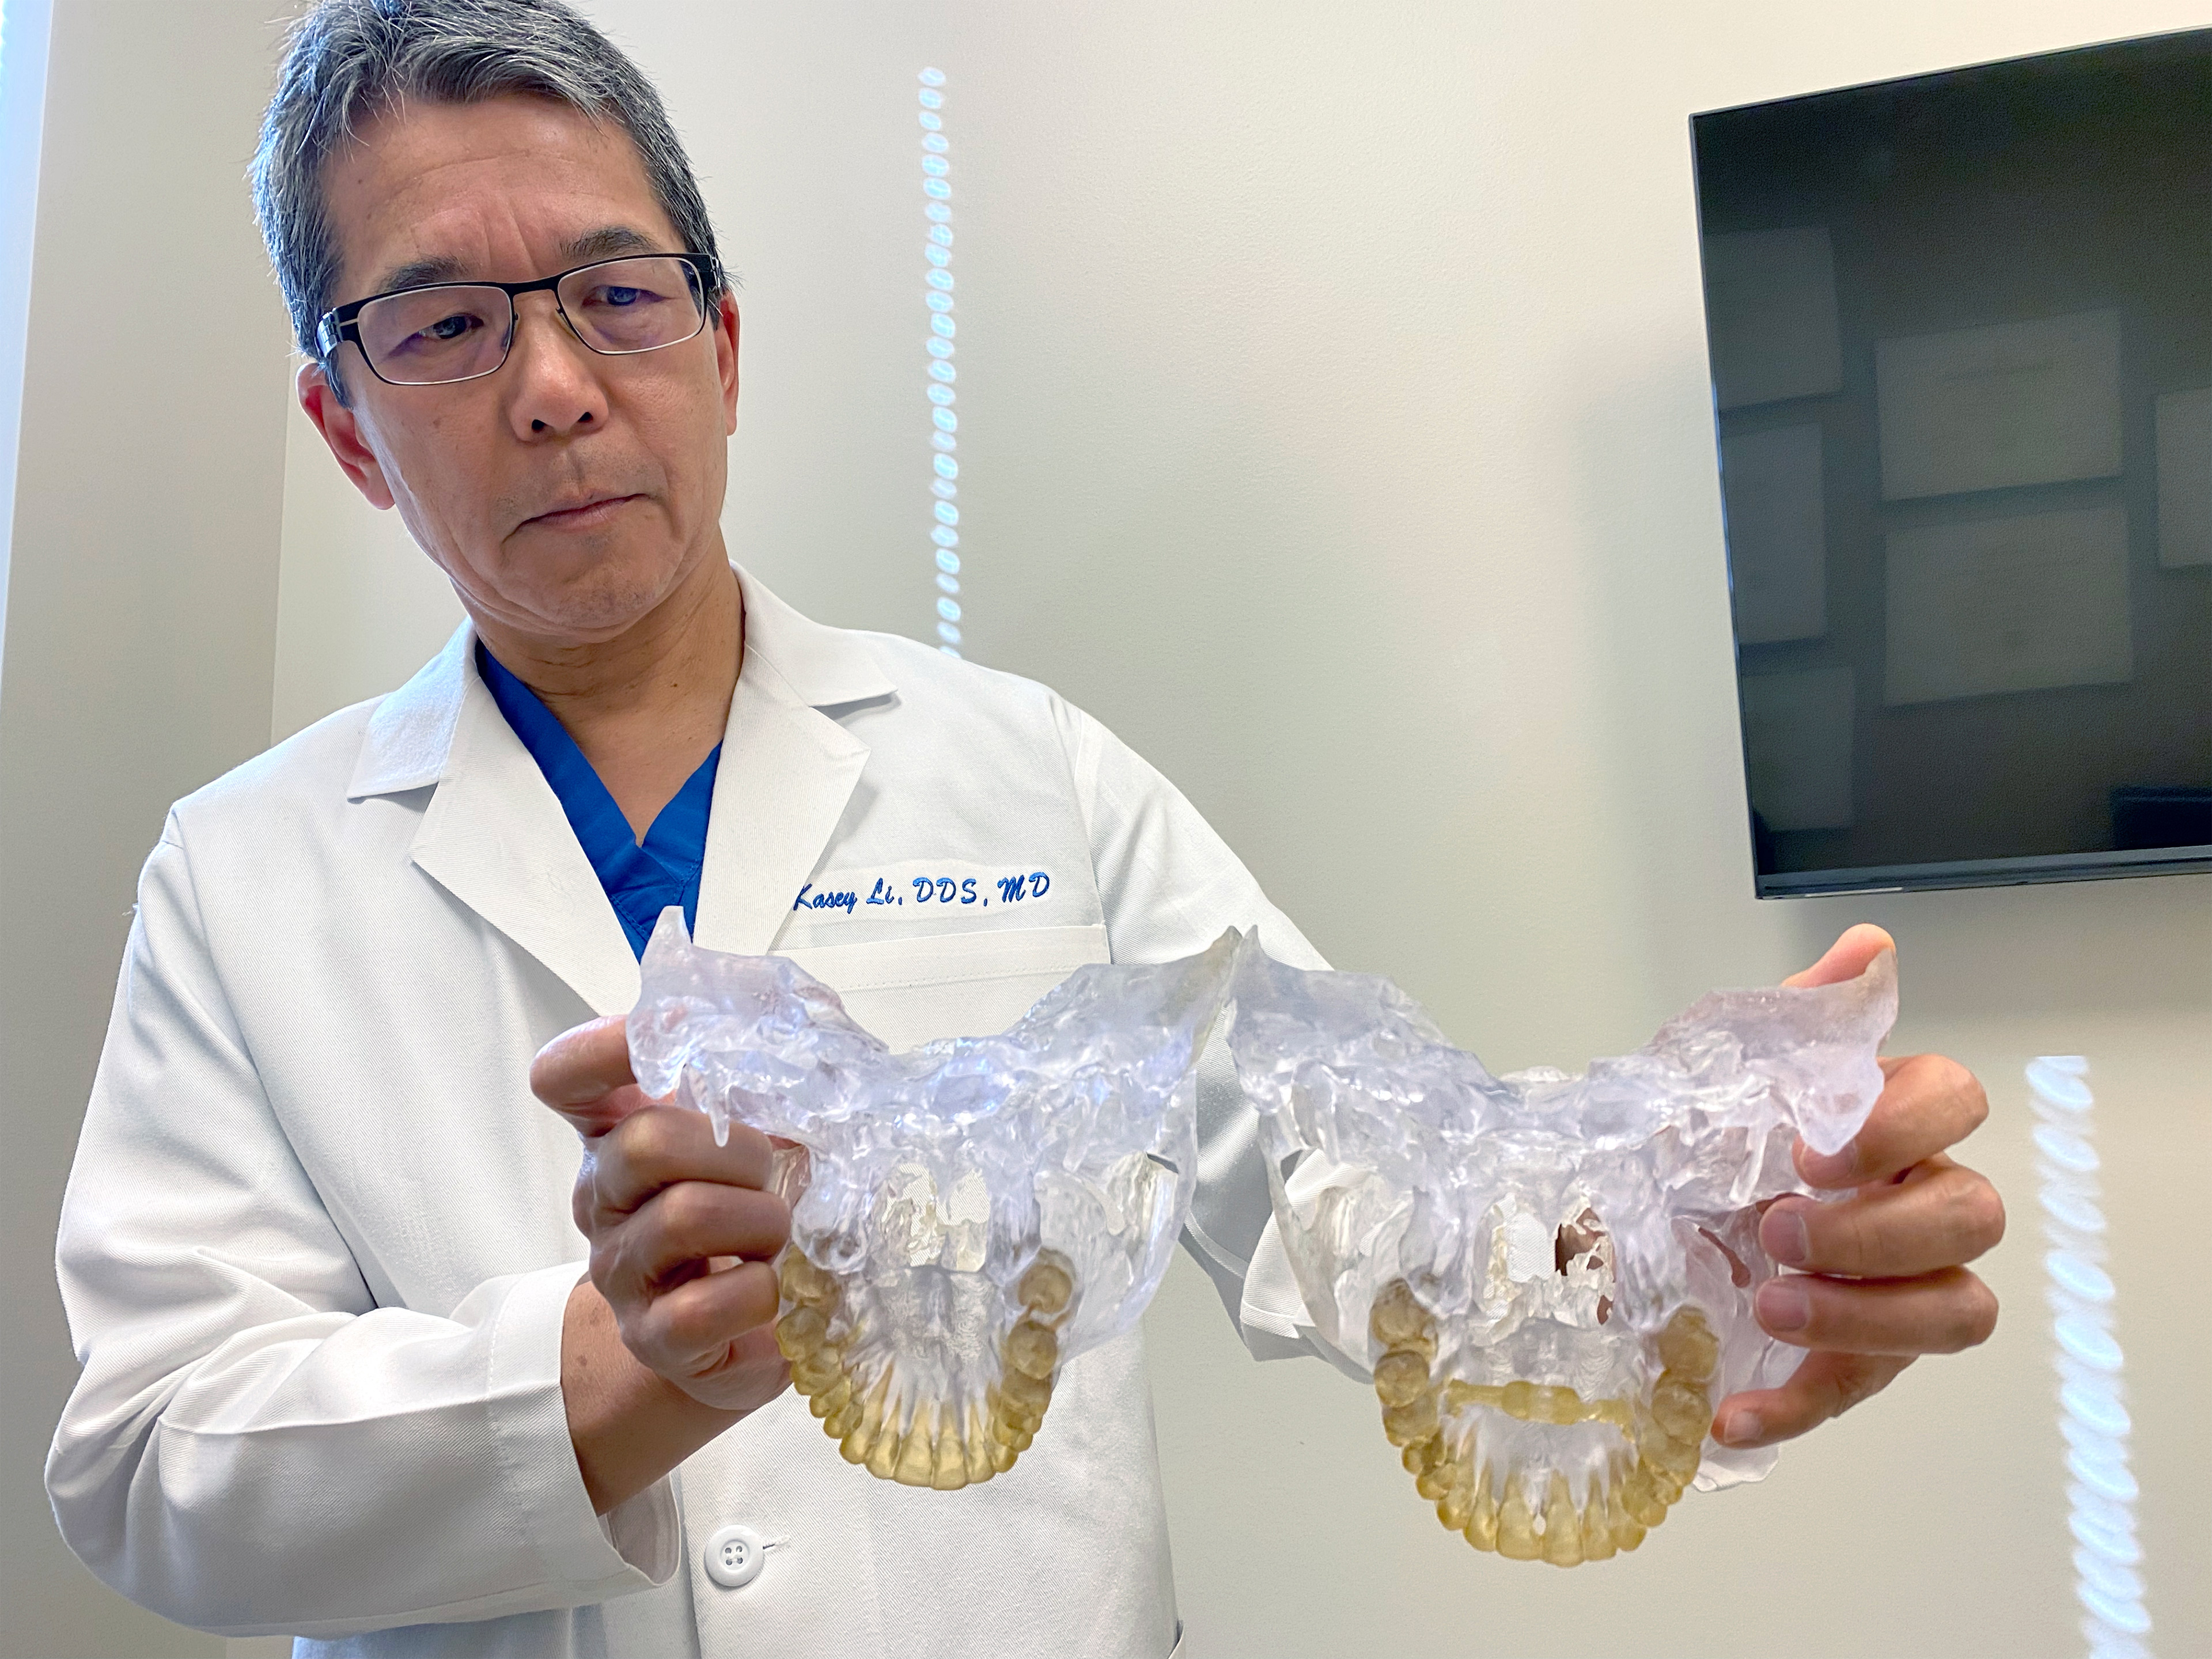 A photo shows a male dental professional holding sculpture models of teeth.